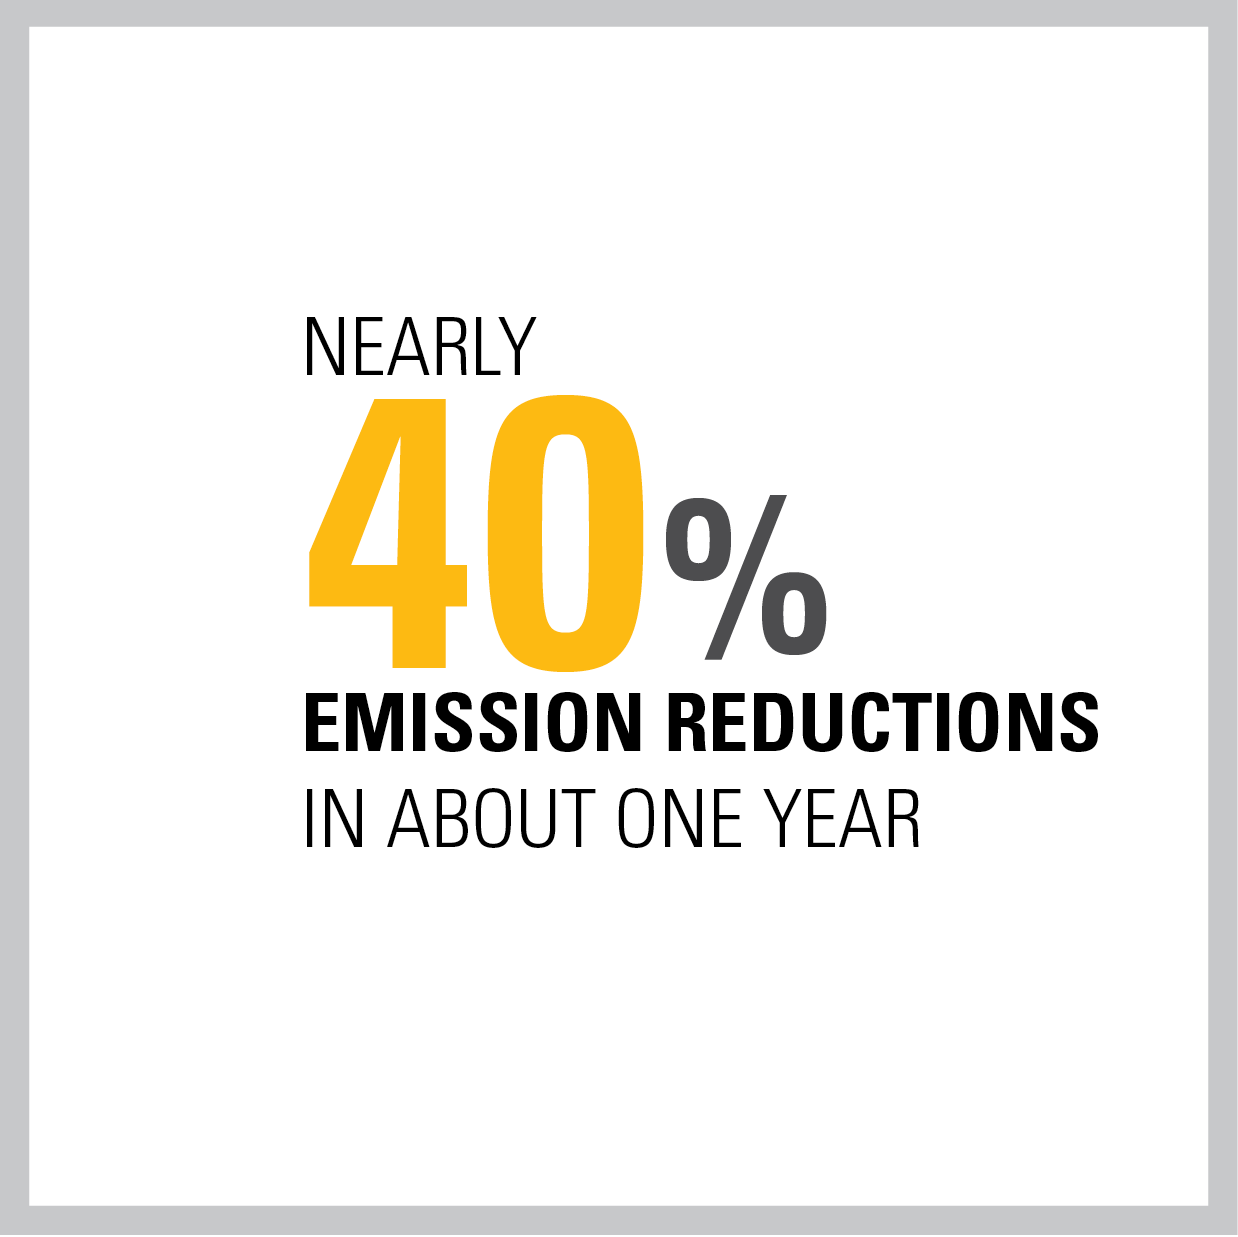 Nearly 40% emission reductions in about one year